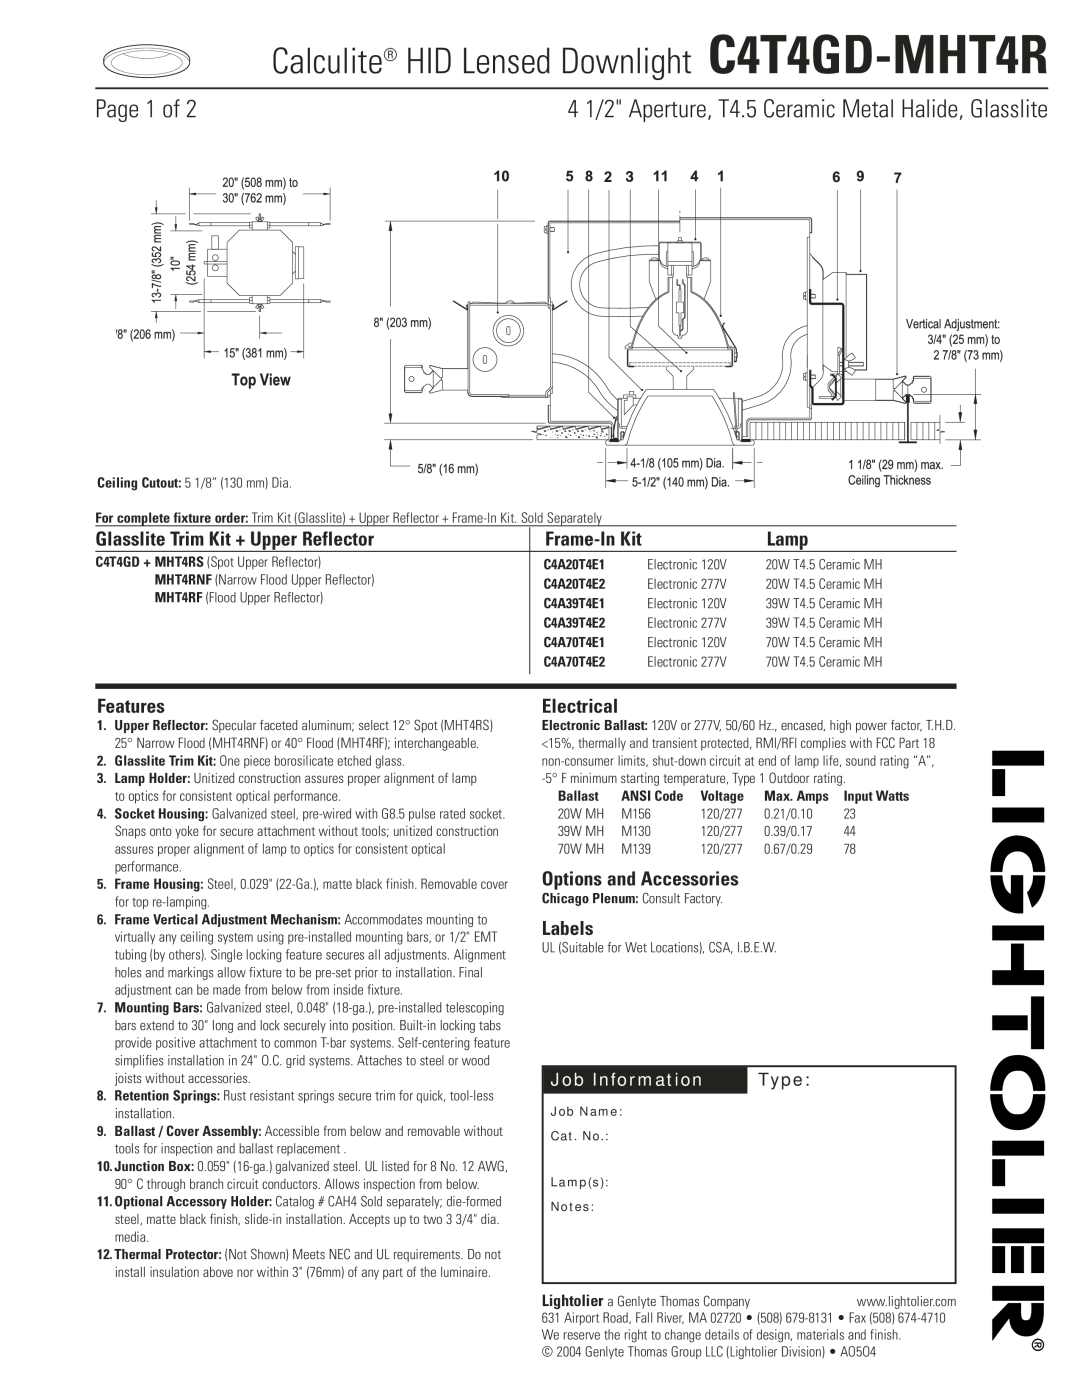 Lightolier manual Calculite HID Lensed Downlight C4T4GD-MHT4R, Job Information, Type, Page 1 of, Lamp, Features, Labels 